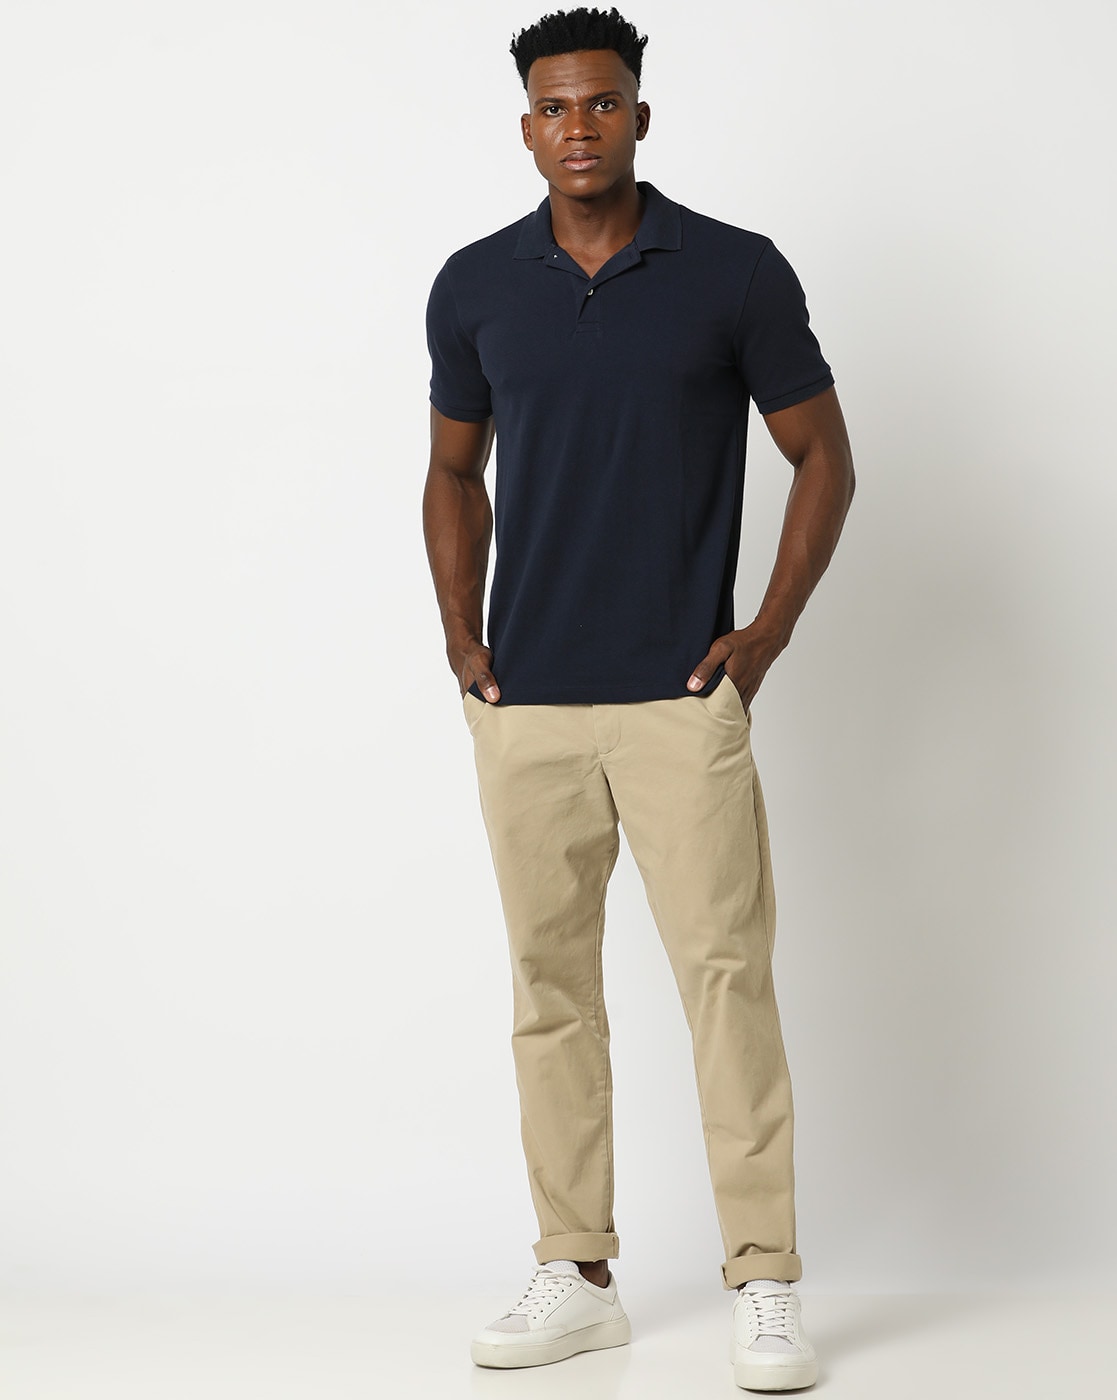 Does blue sneakers goes well with khaki pants  Quora